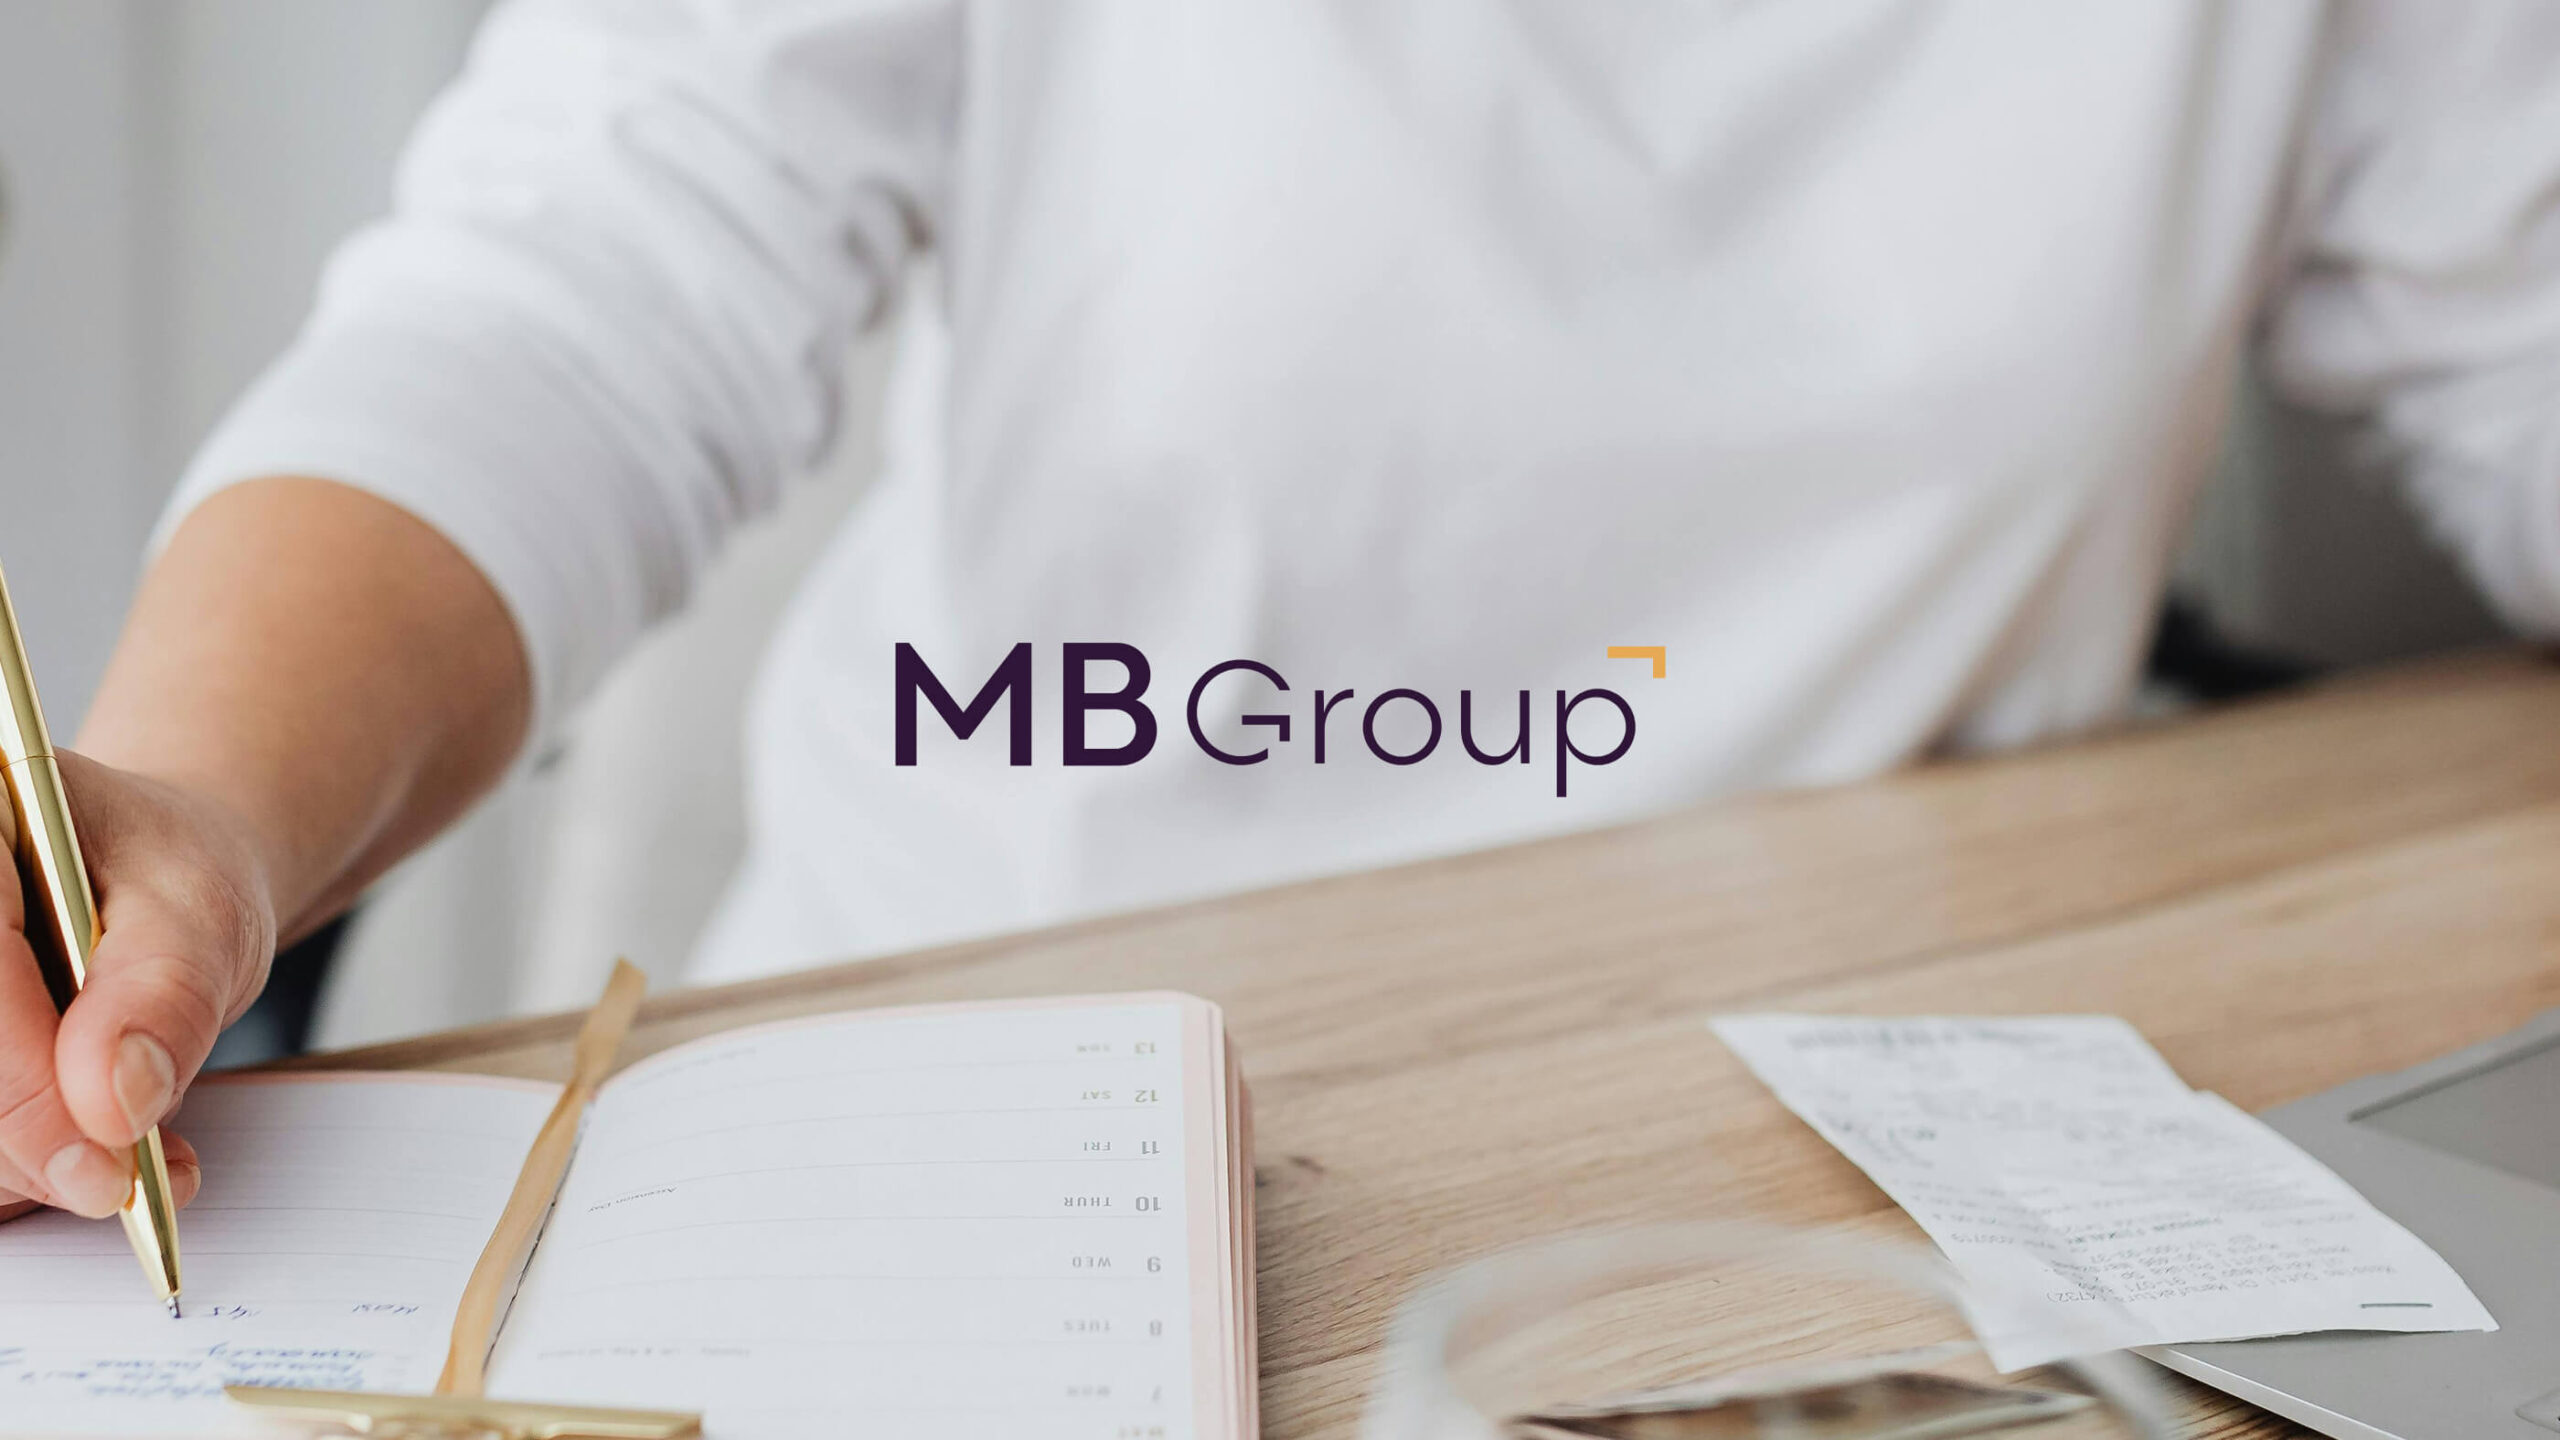 brand design for accounting firm, mb group logo